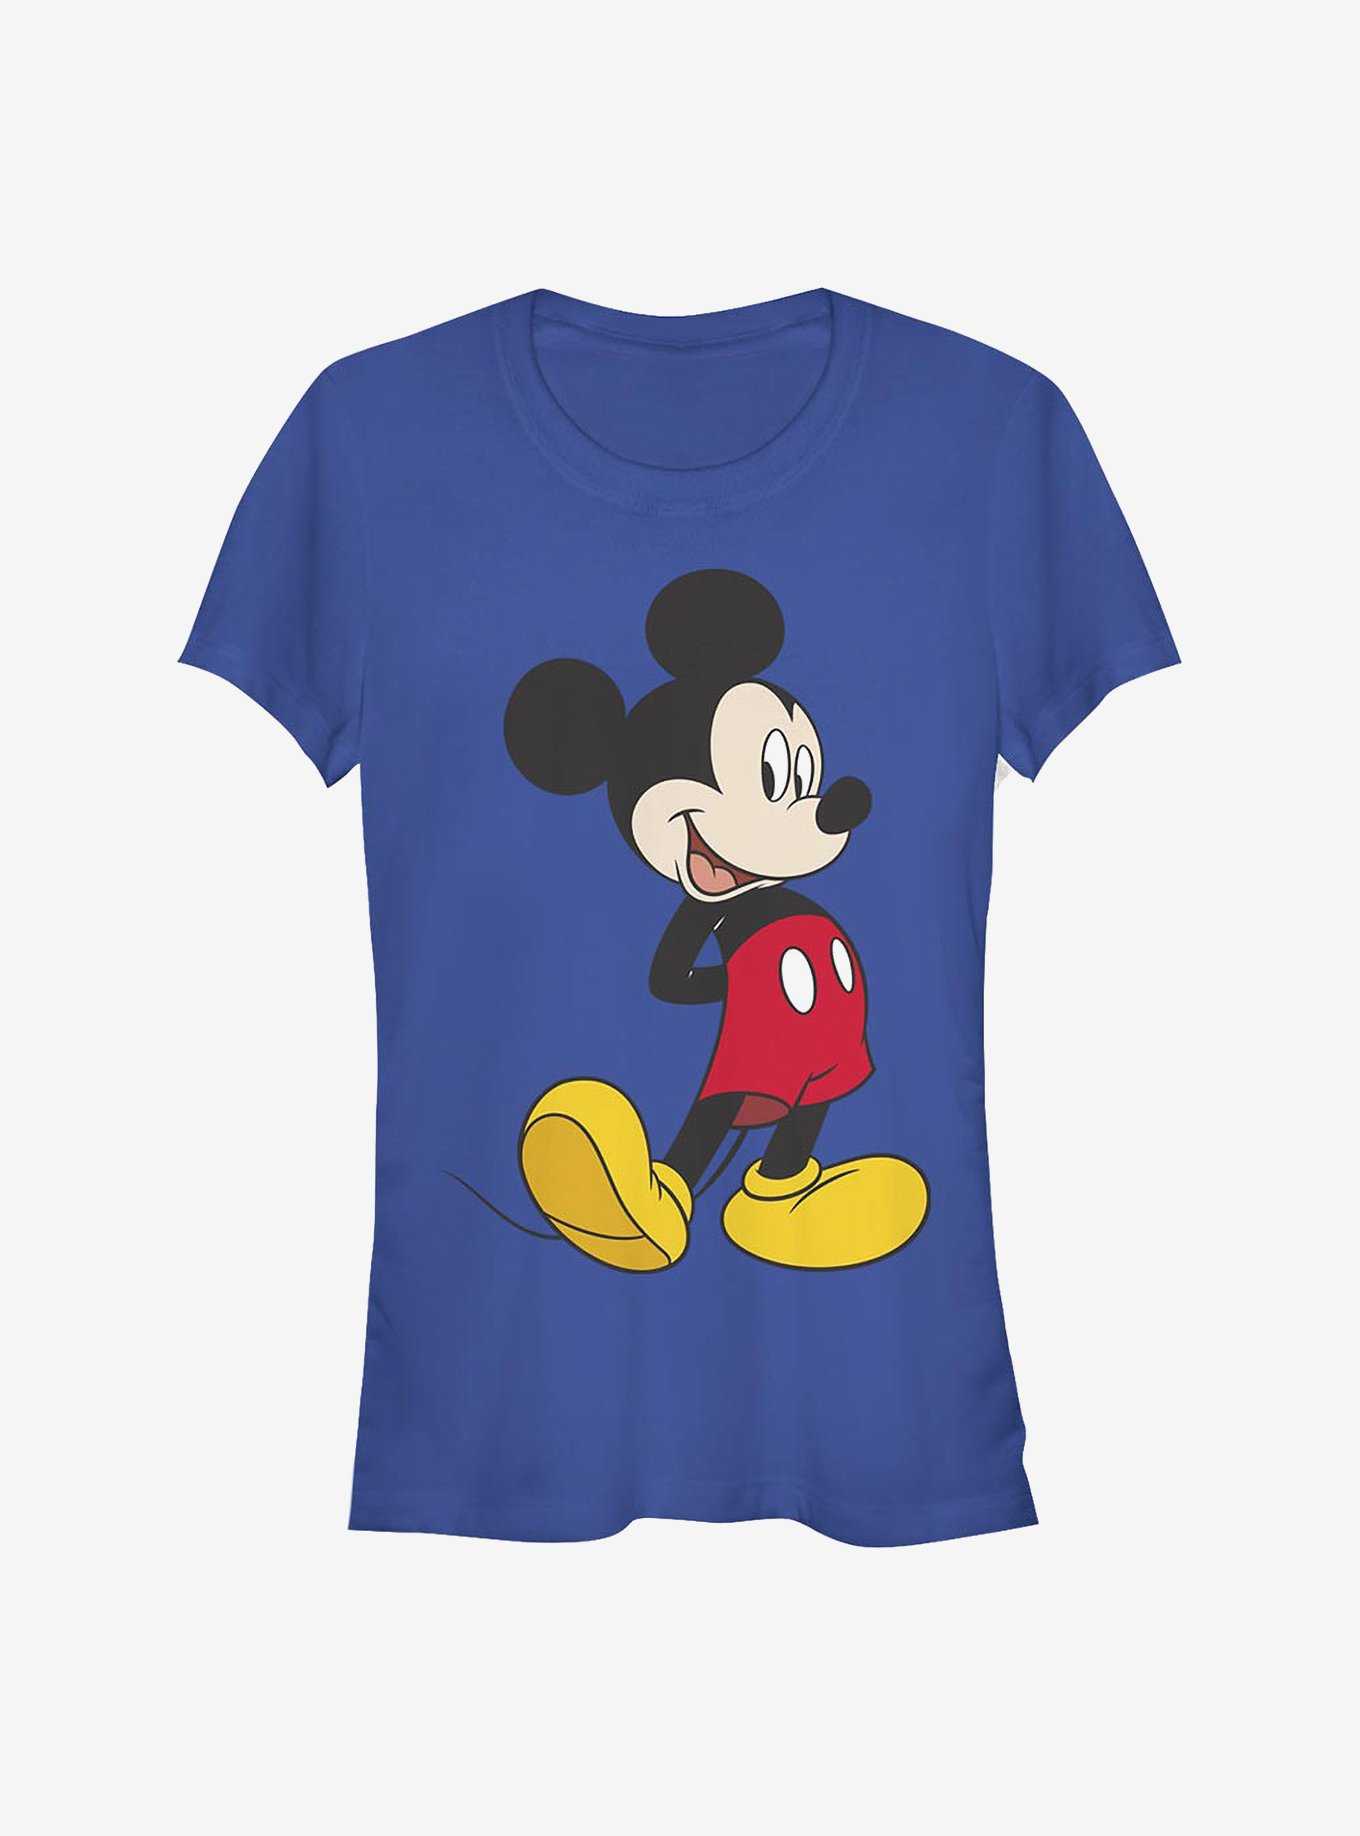 Disney Mickey Mouse Traditional Mickey Girls T-Shirt, , hi-res